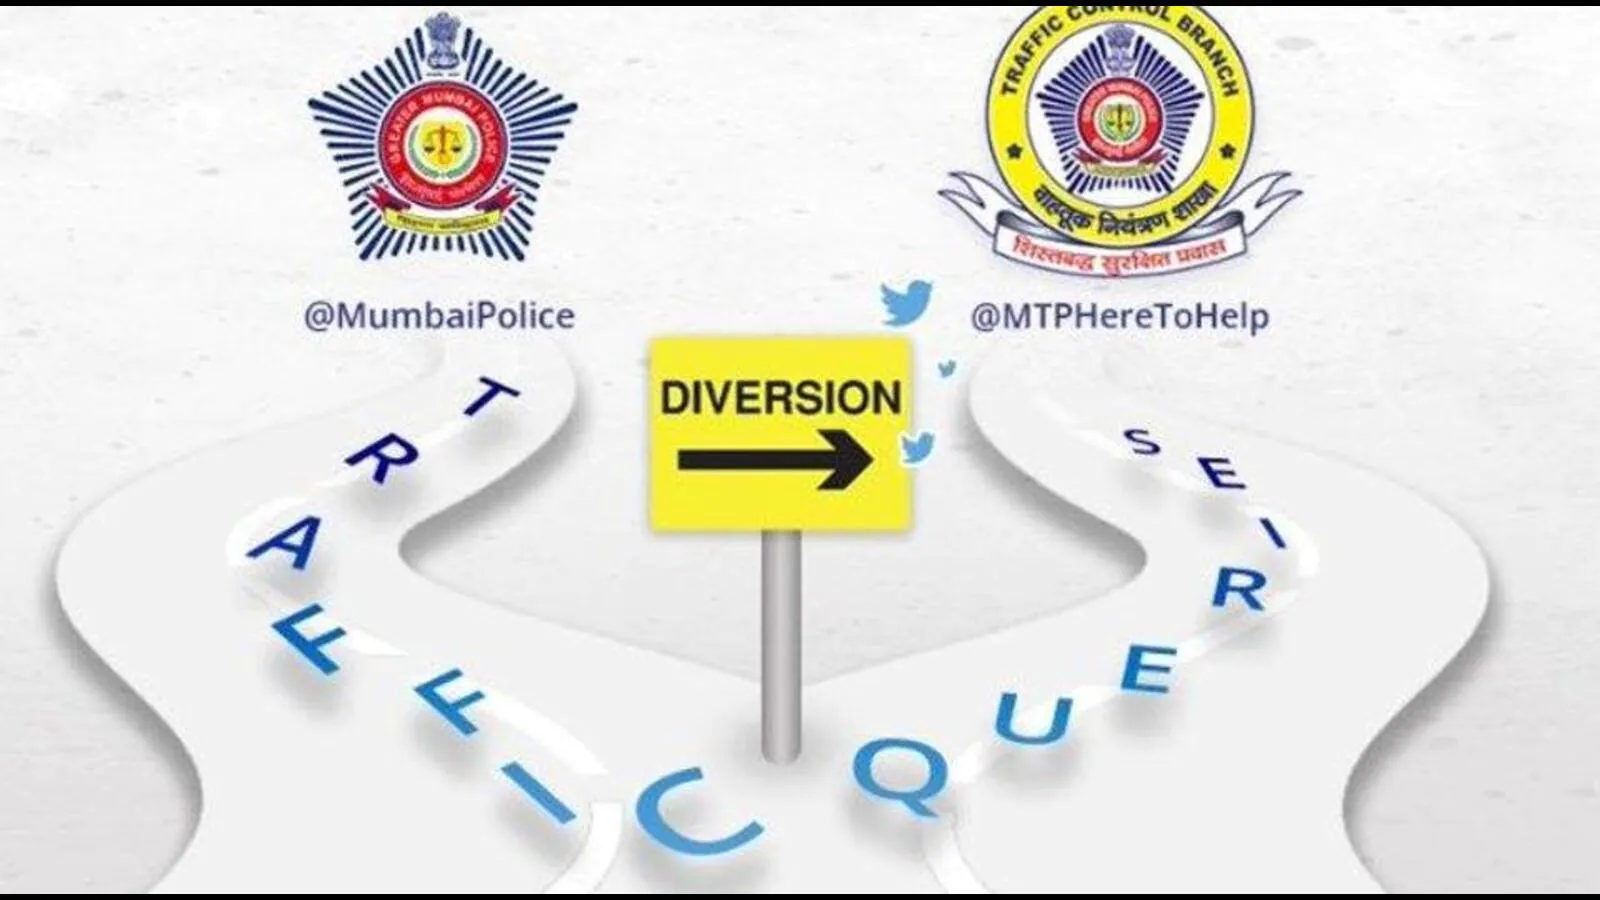 Mumbai traffic police launch independent Twitter handle